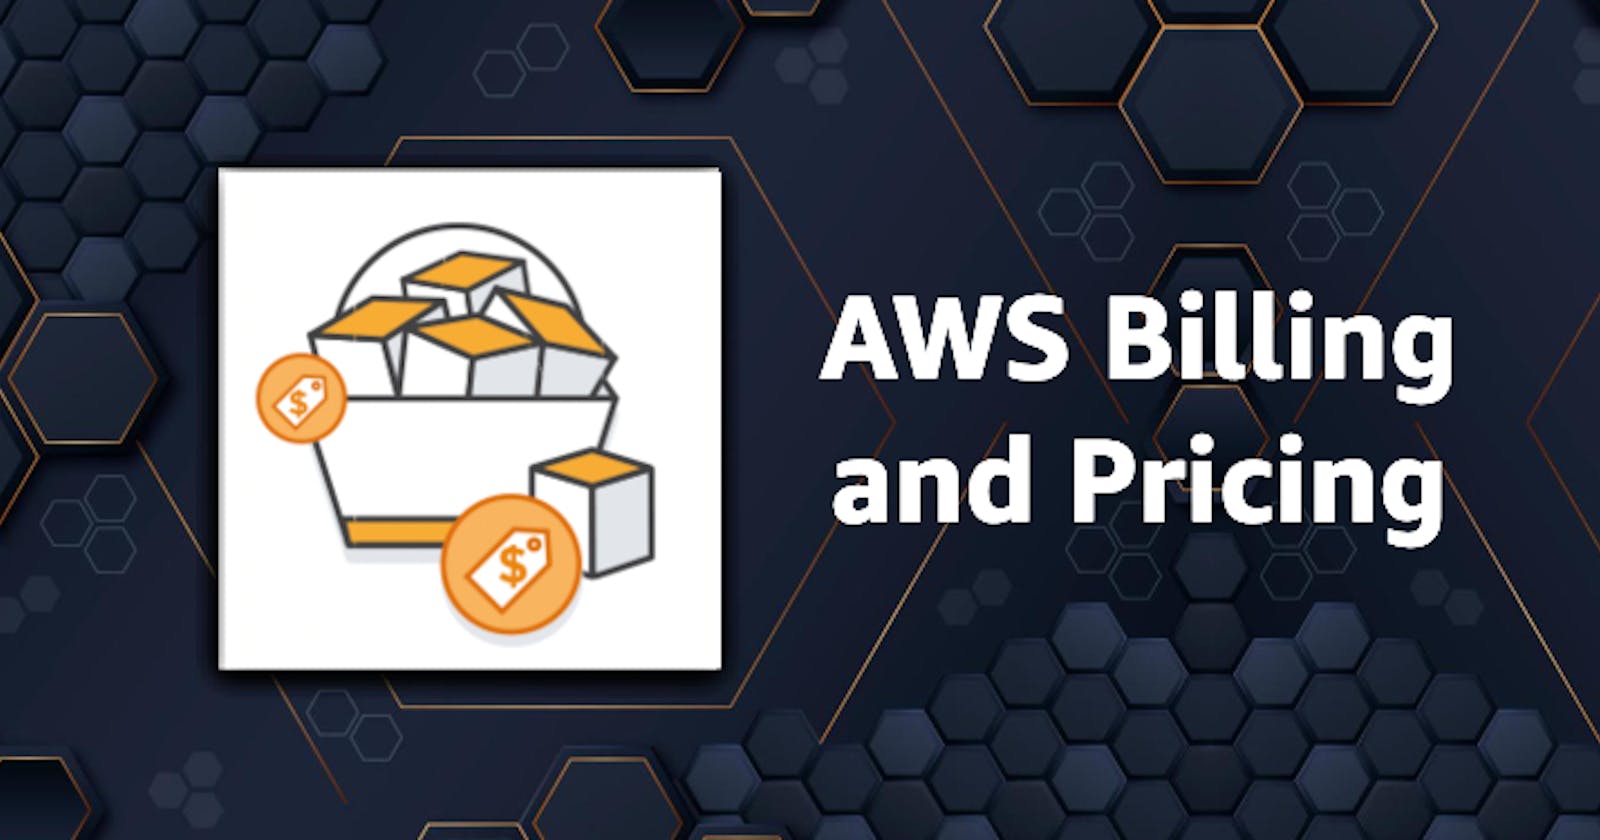 Surviving the AWS Free Tier: How I Dodged a Massive Bill and Got Support to Save the Day